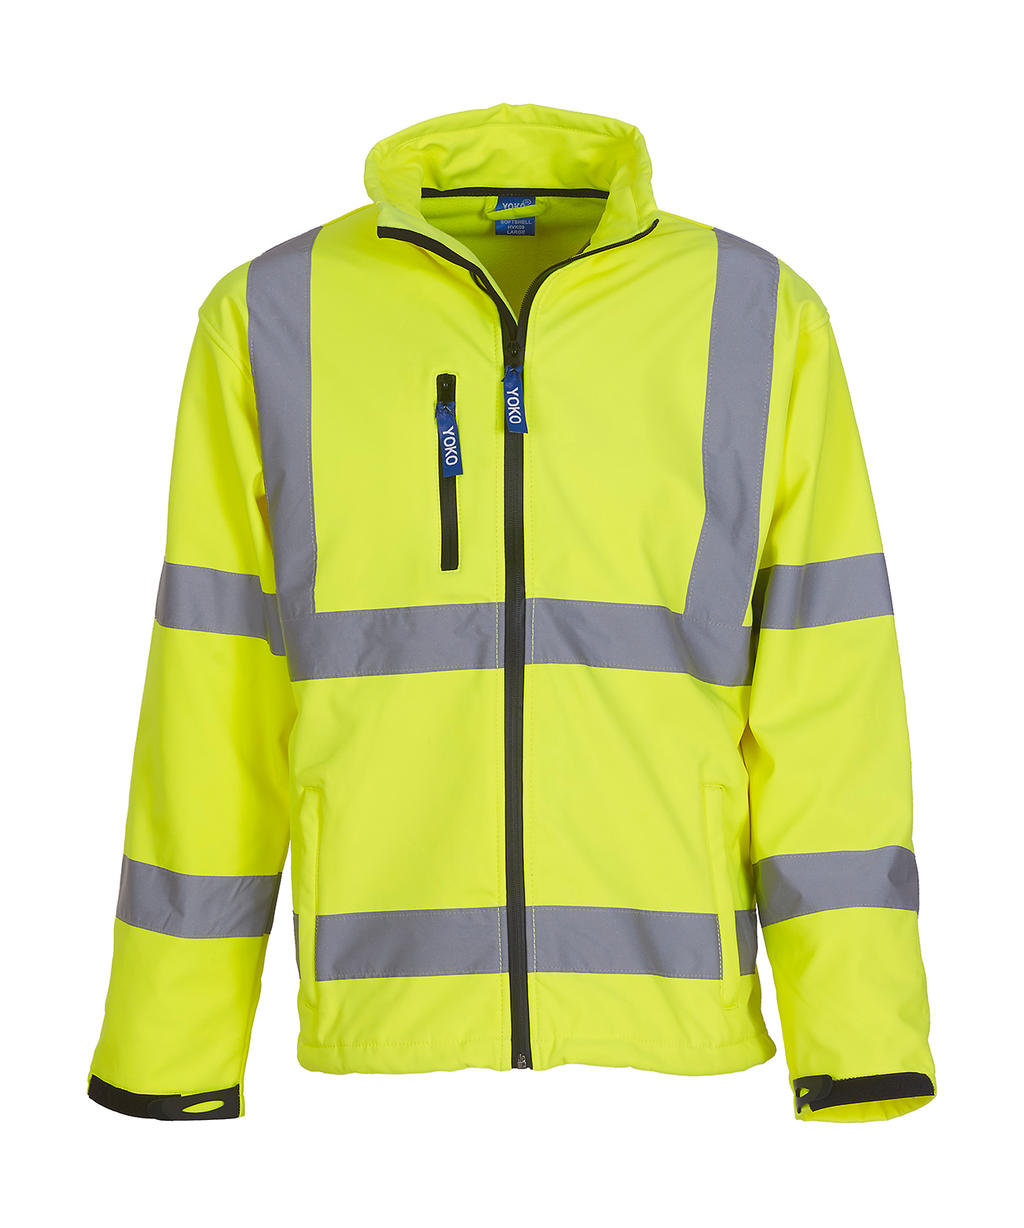  Fluo Softshell Jacket in Farbe Fluo Yellow